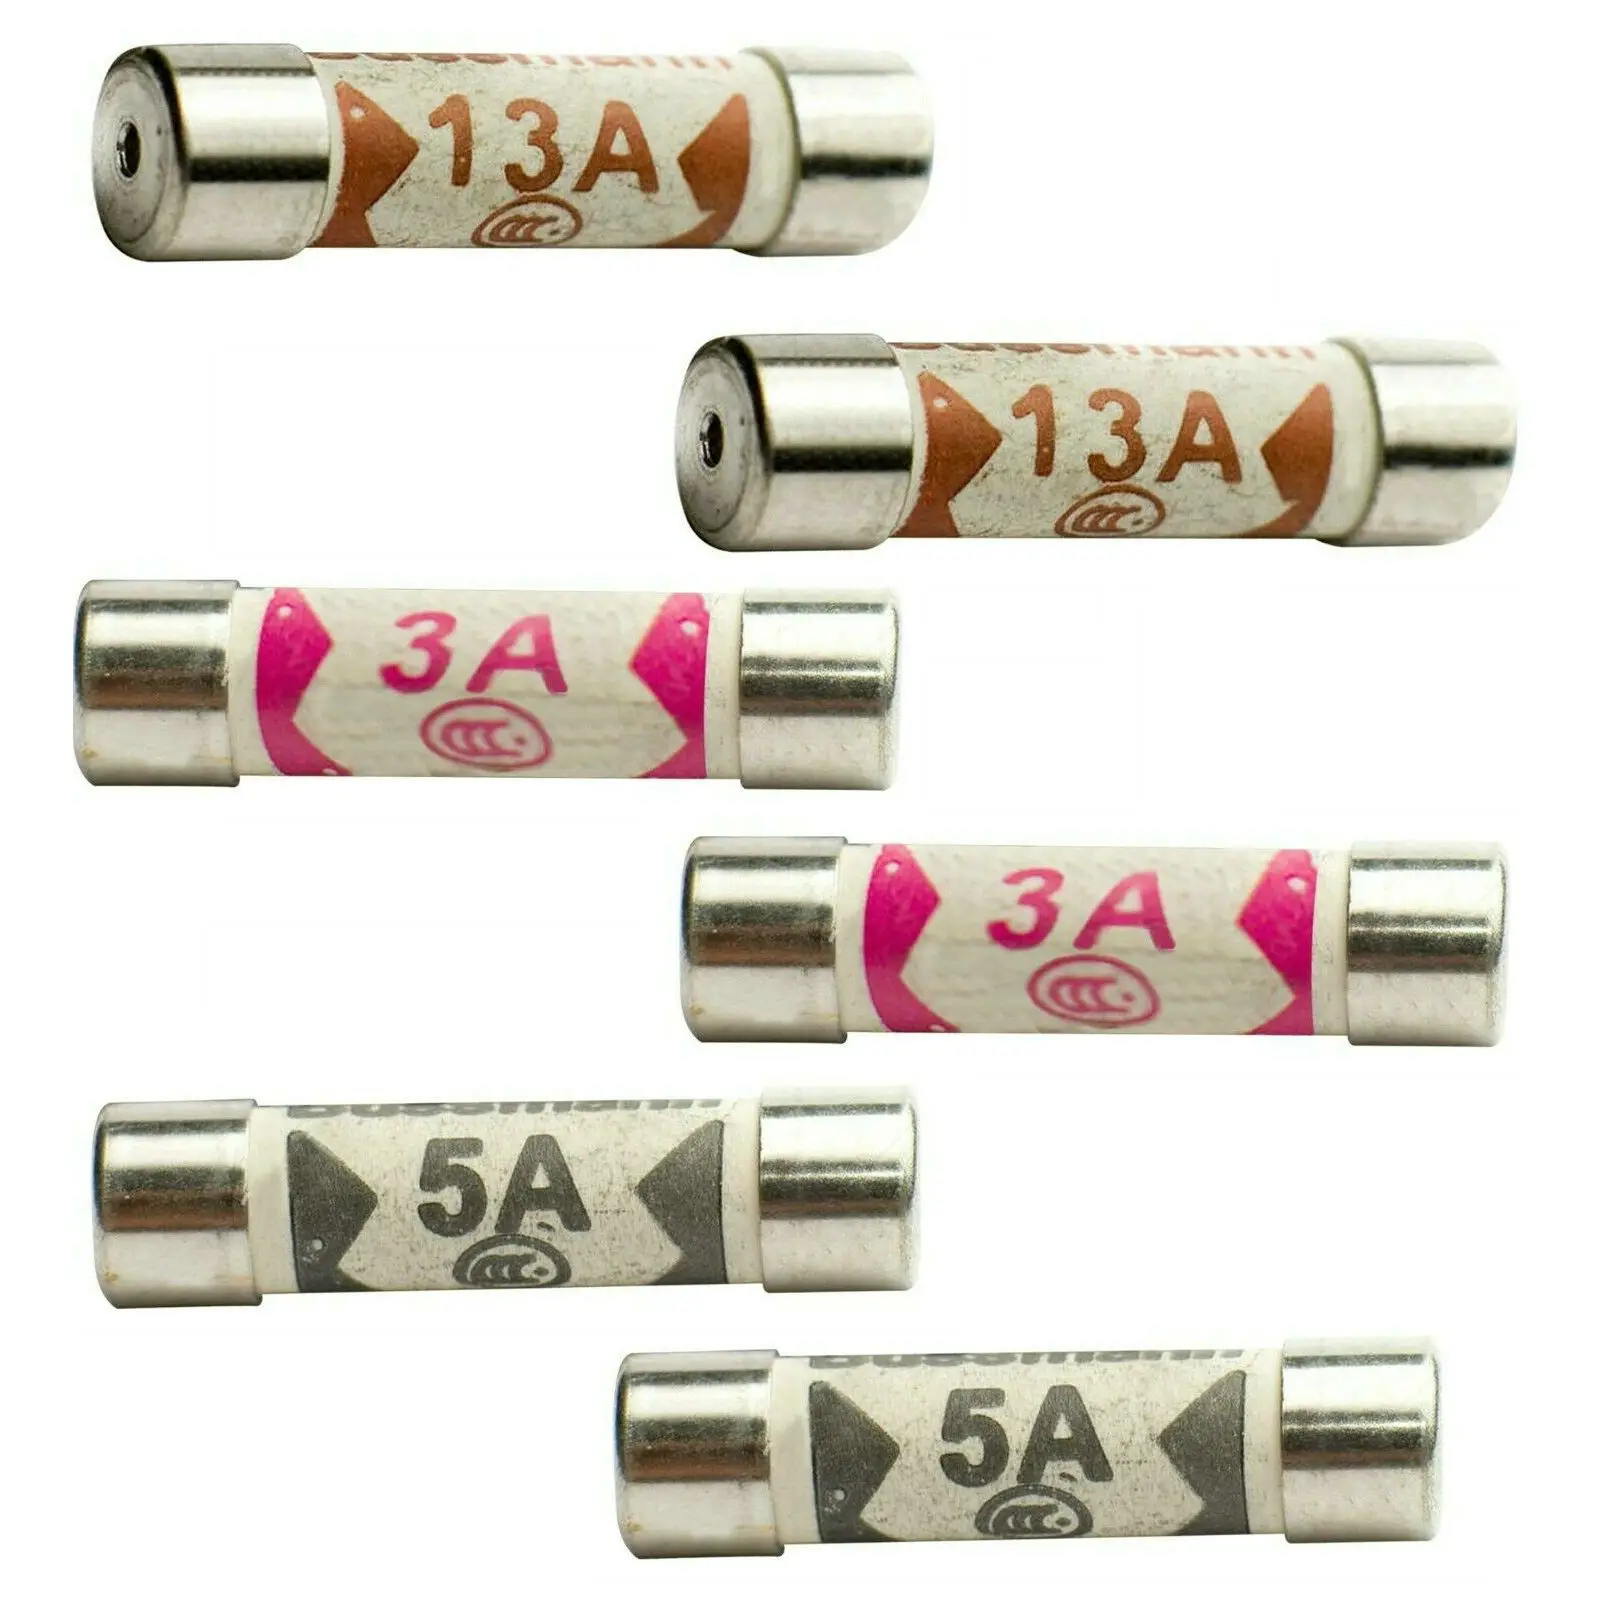 Details about   Fuses Household Domestic Ceramic Mixed Packs 3A 5A 13A Fuse Cartridge Mains Plug 